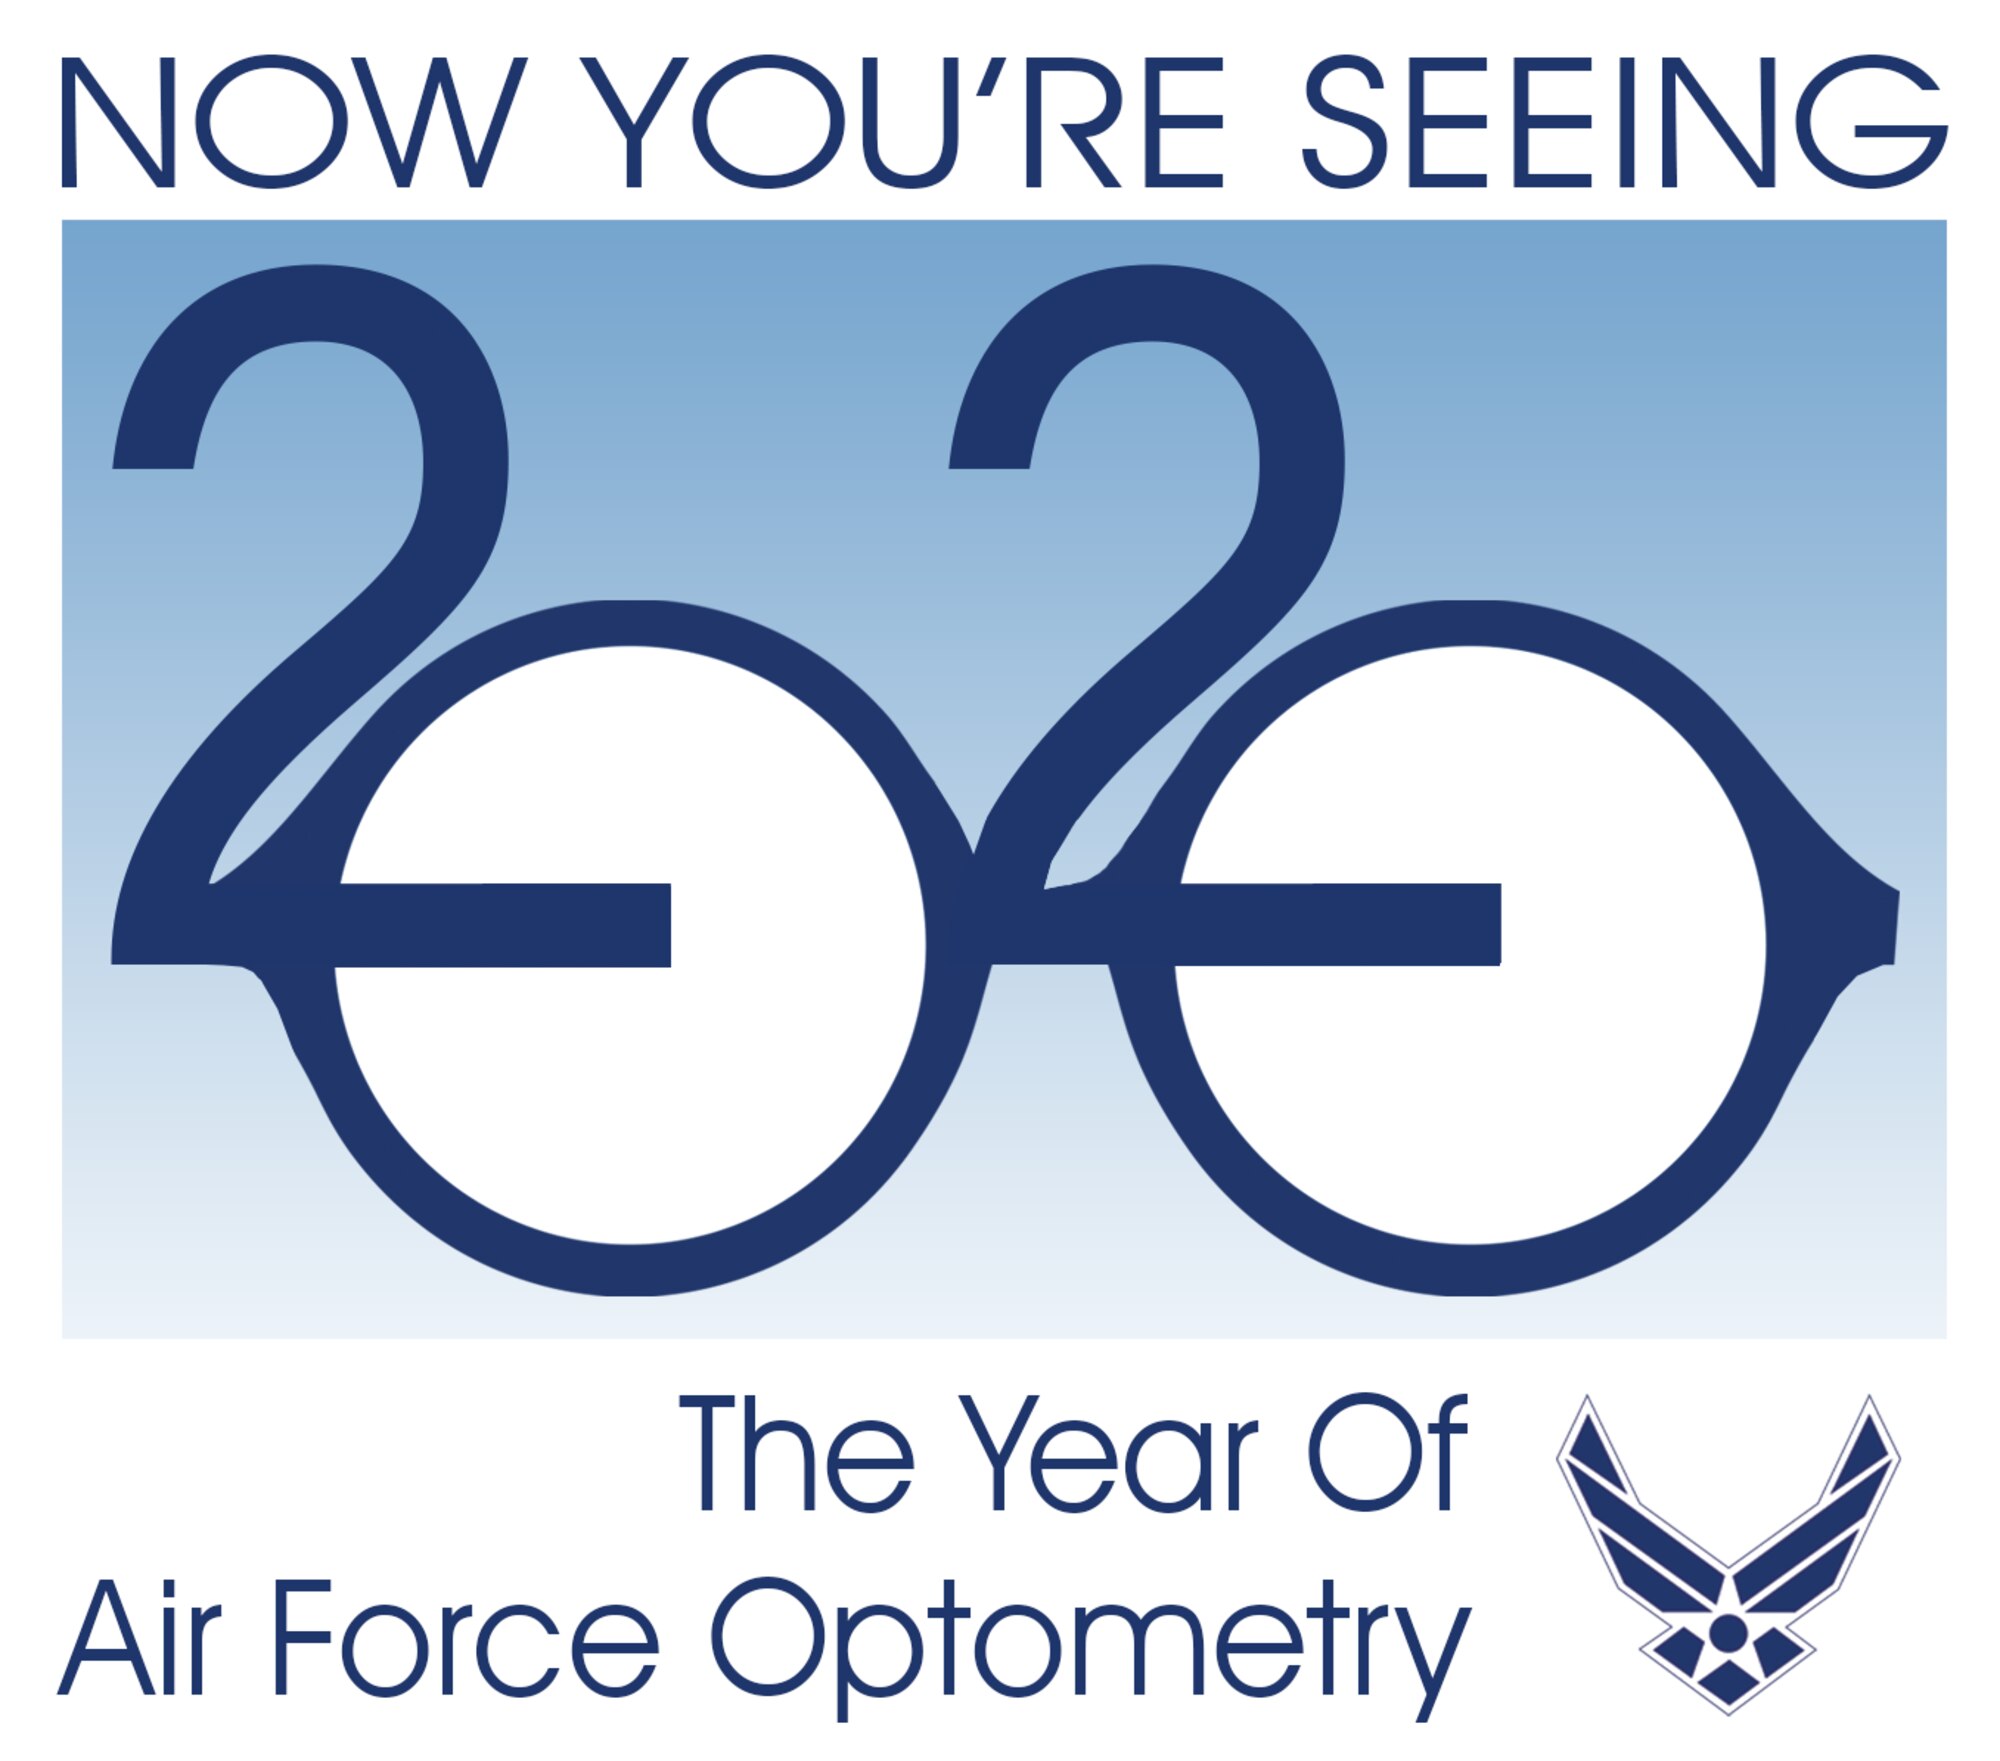 Air Force optometry came into existence around the same time the Air Force Medical Service stood up on July 1, 1949, and has been caring for the vision of aviators and warfighters ever since. 2020, ‘The Year of Optometry’, focuses on ensuring eye health and vision care are a priority. (Courtesy graphic)